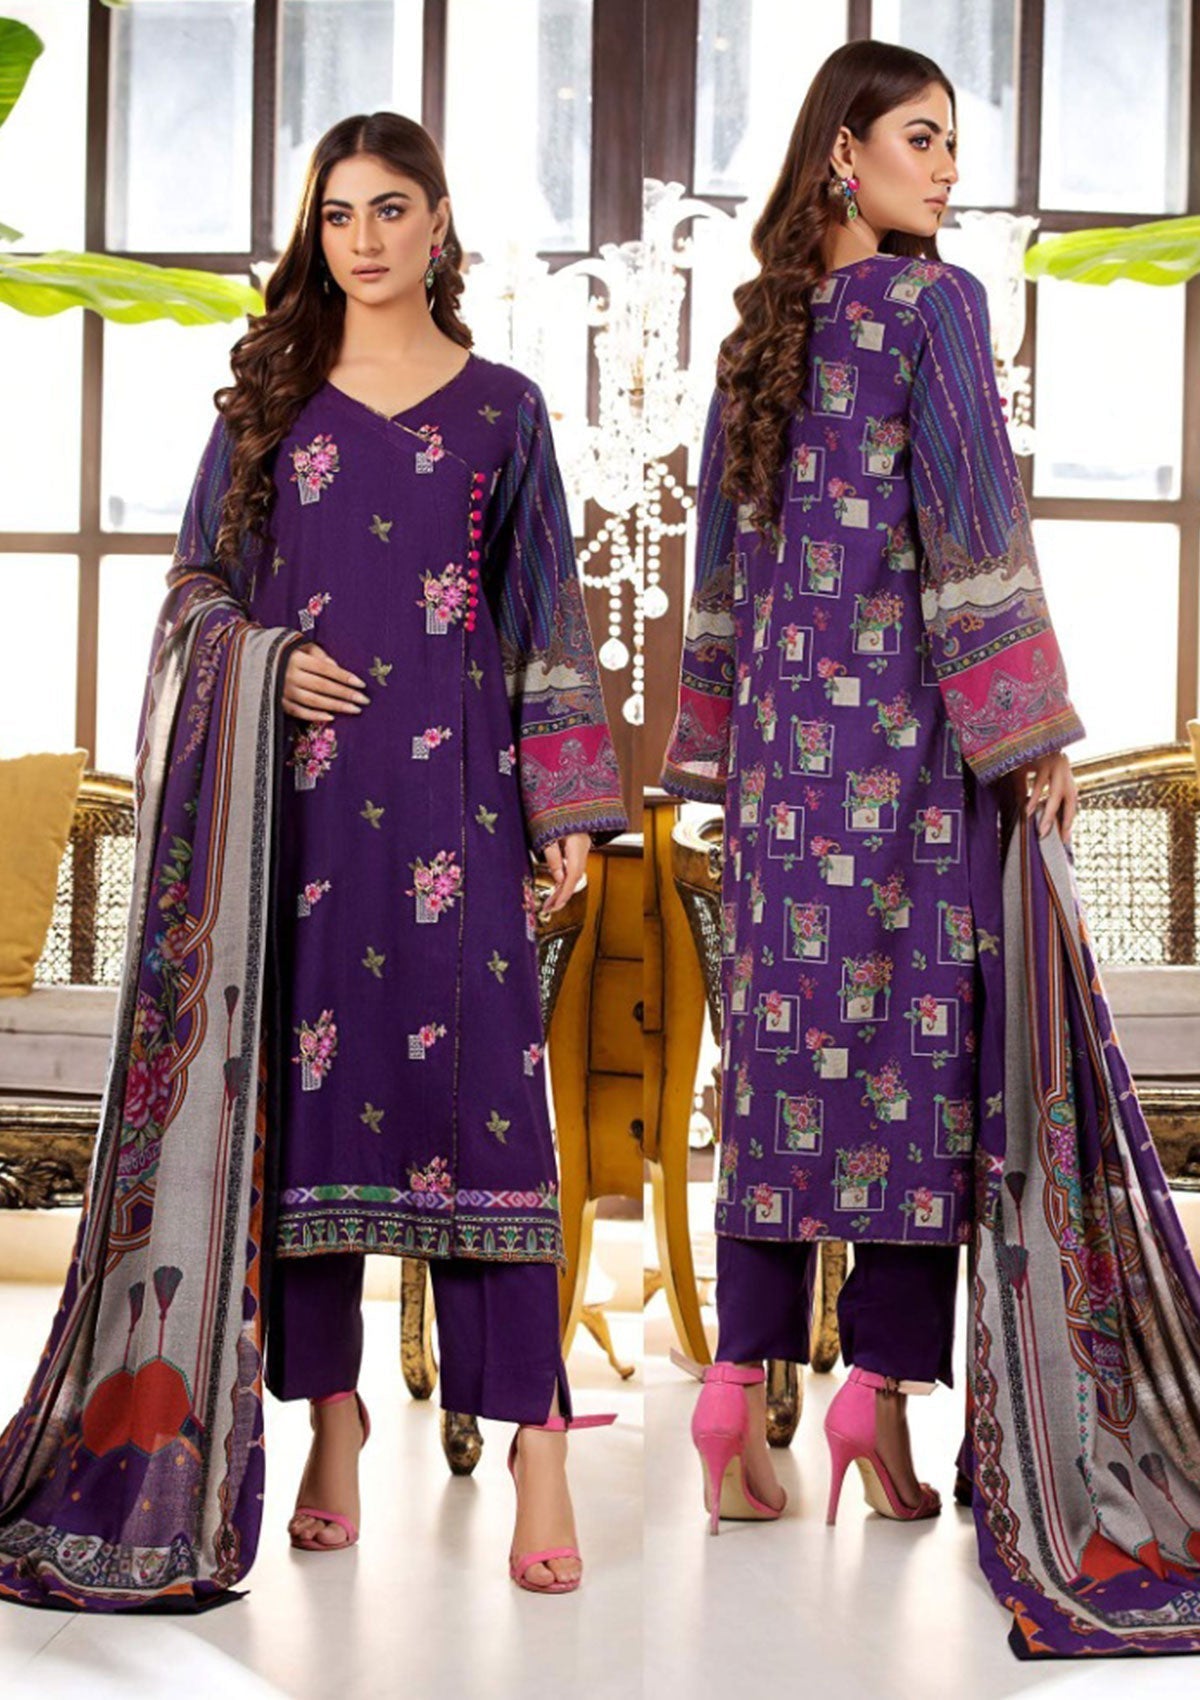 Winter Collection - Noor Jahan - Mina Hassan - D#8 available at Saleem Fabrics Traditions